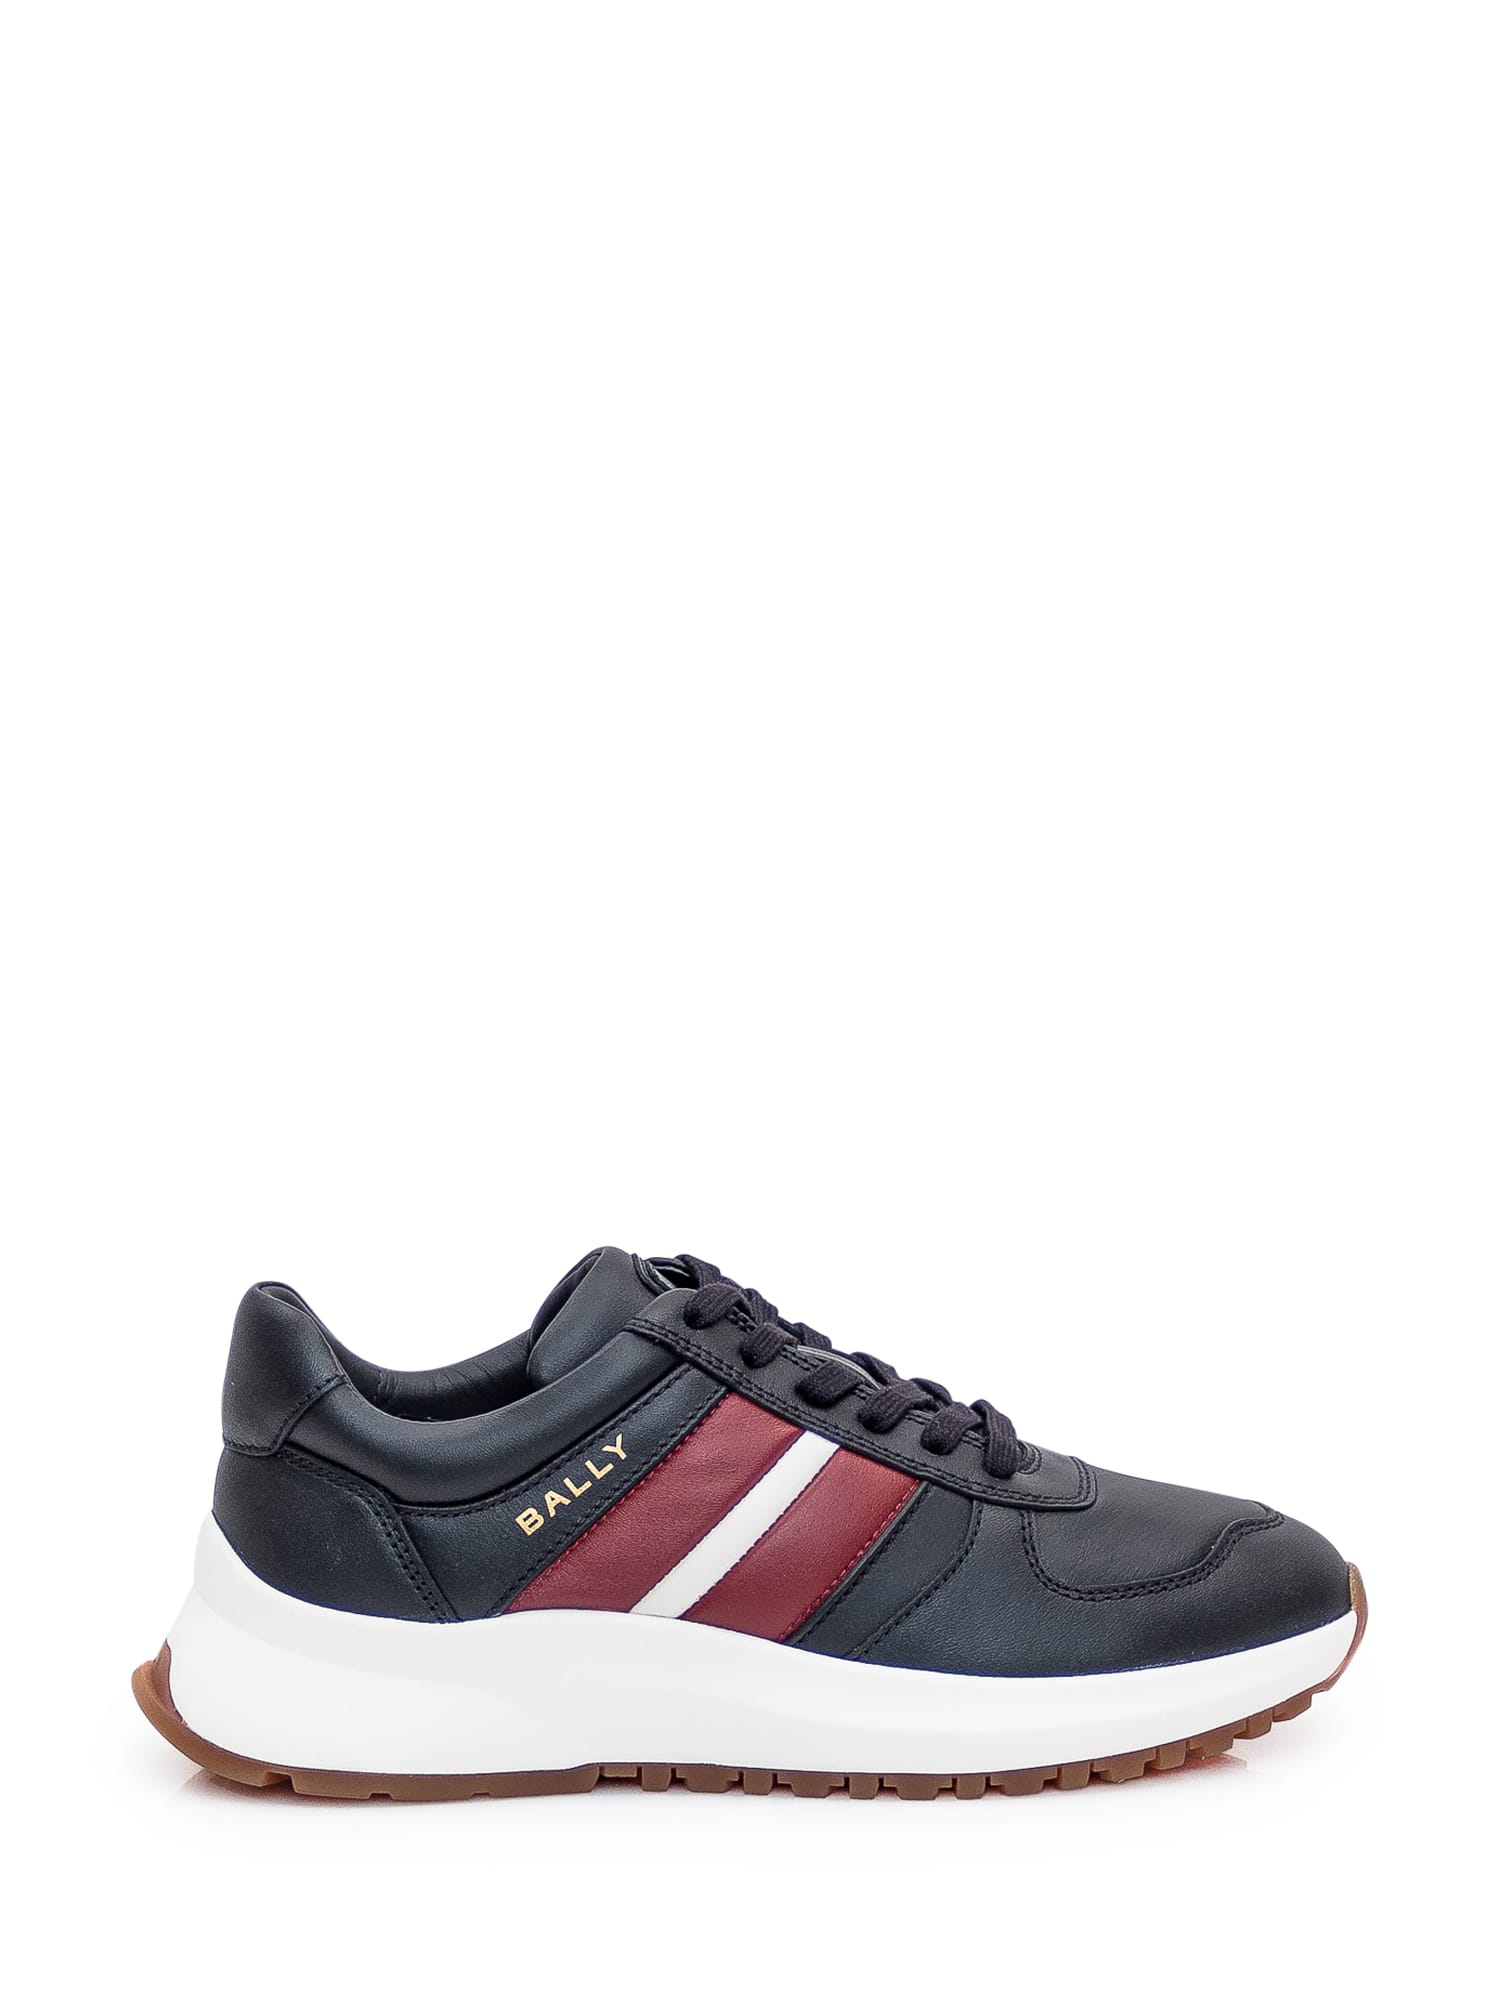 Bally Leather Trainer In Black/b.red/white